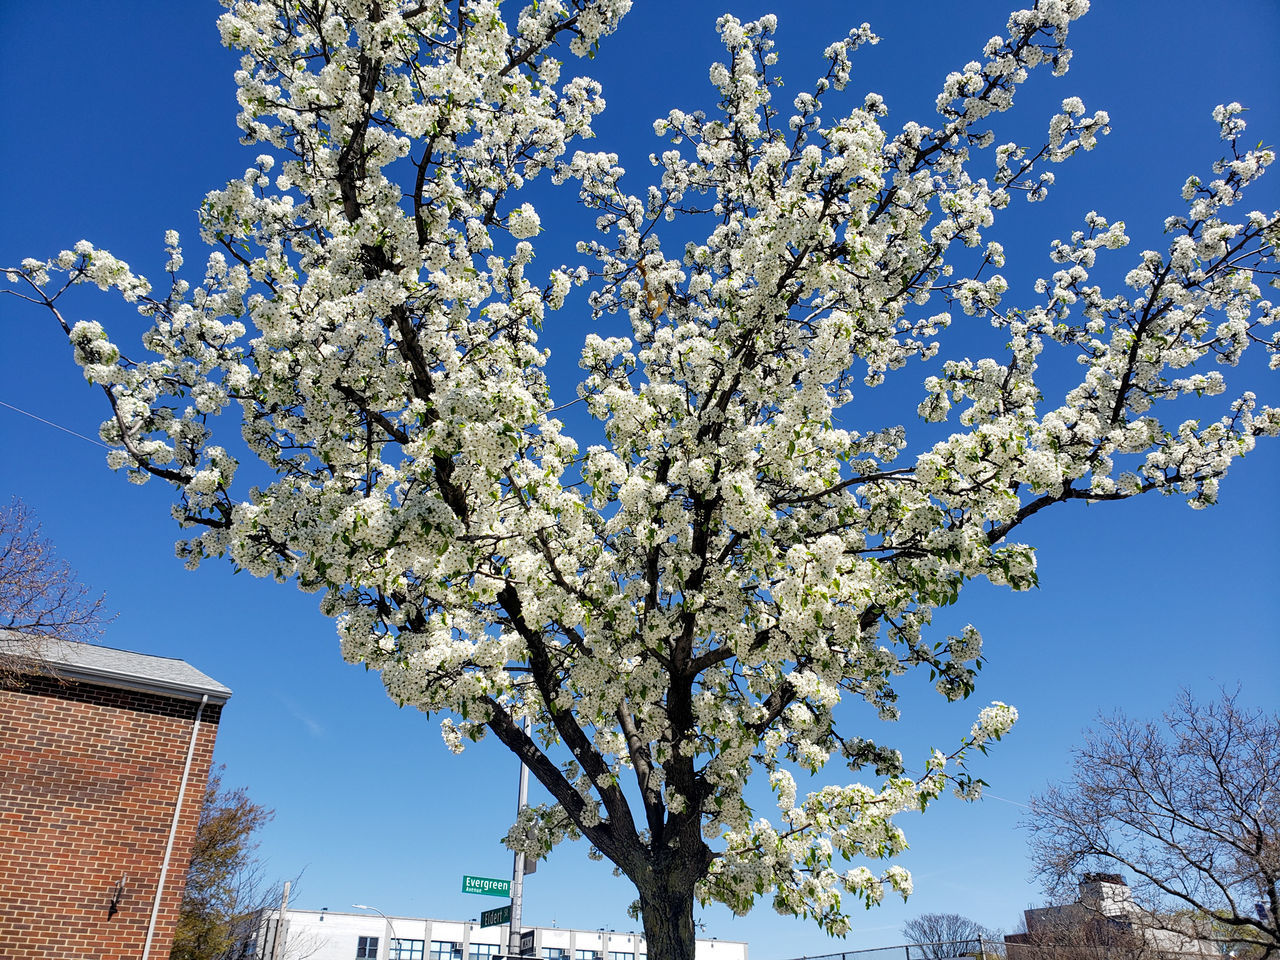 plant, tree, flower, nature, blossom, branch, sky, architecture, growth, spring, springtime, built structure, building exterior, flowering plant, beauty in nature, freshness, fragility, low angle view, no people, day, blue, clear sky, building, outdoors, fruit tree, cherry blossom, house, city, cherry tree, sunlight